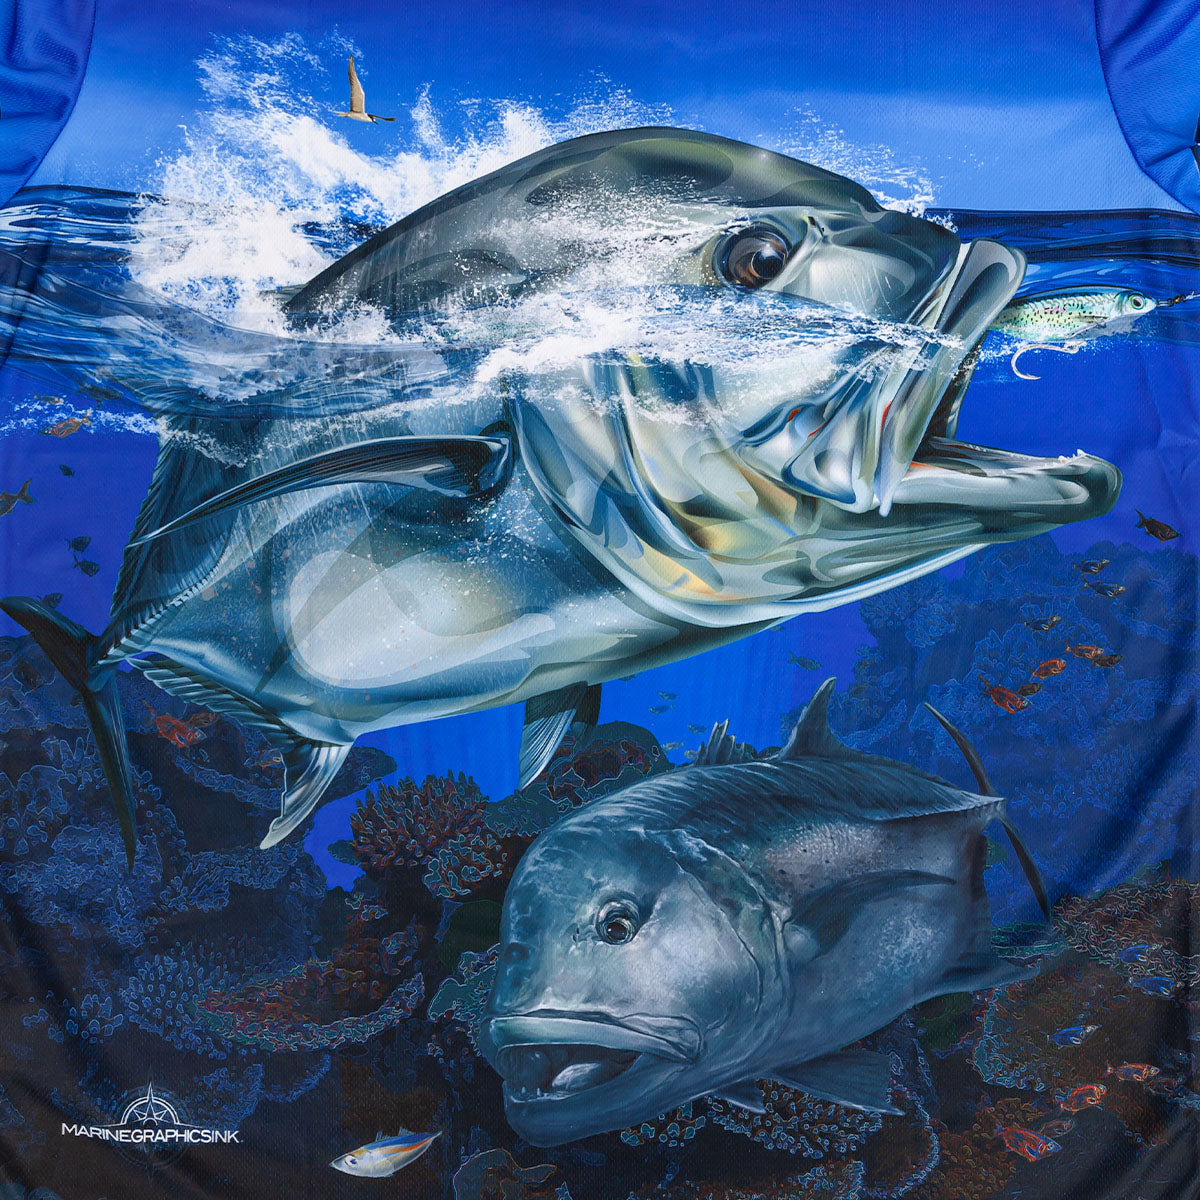 Giant Trevally Fishing Jersey